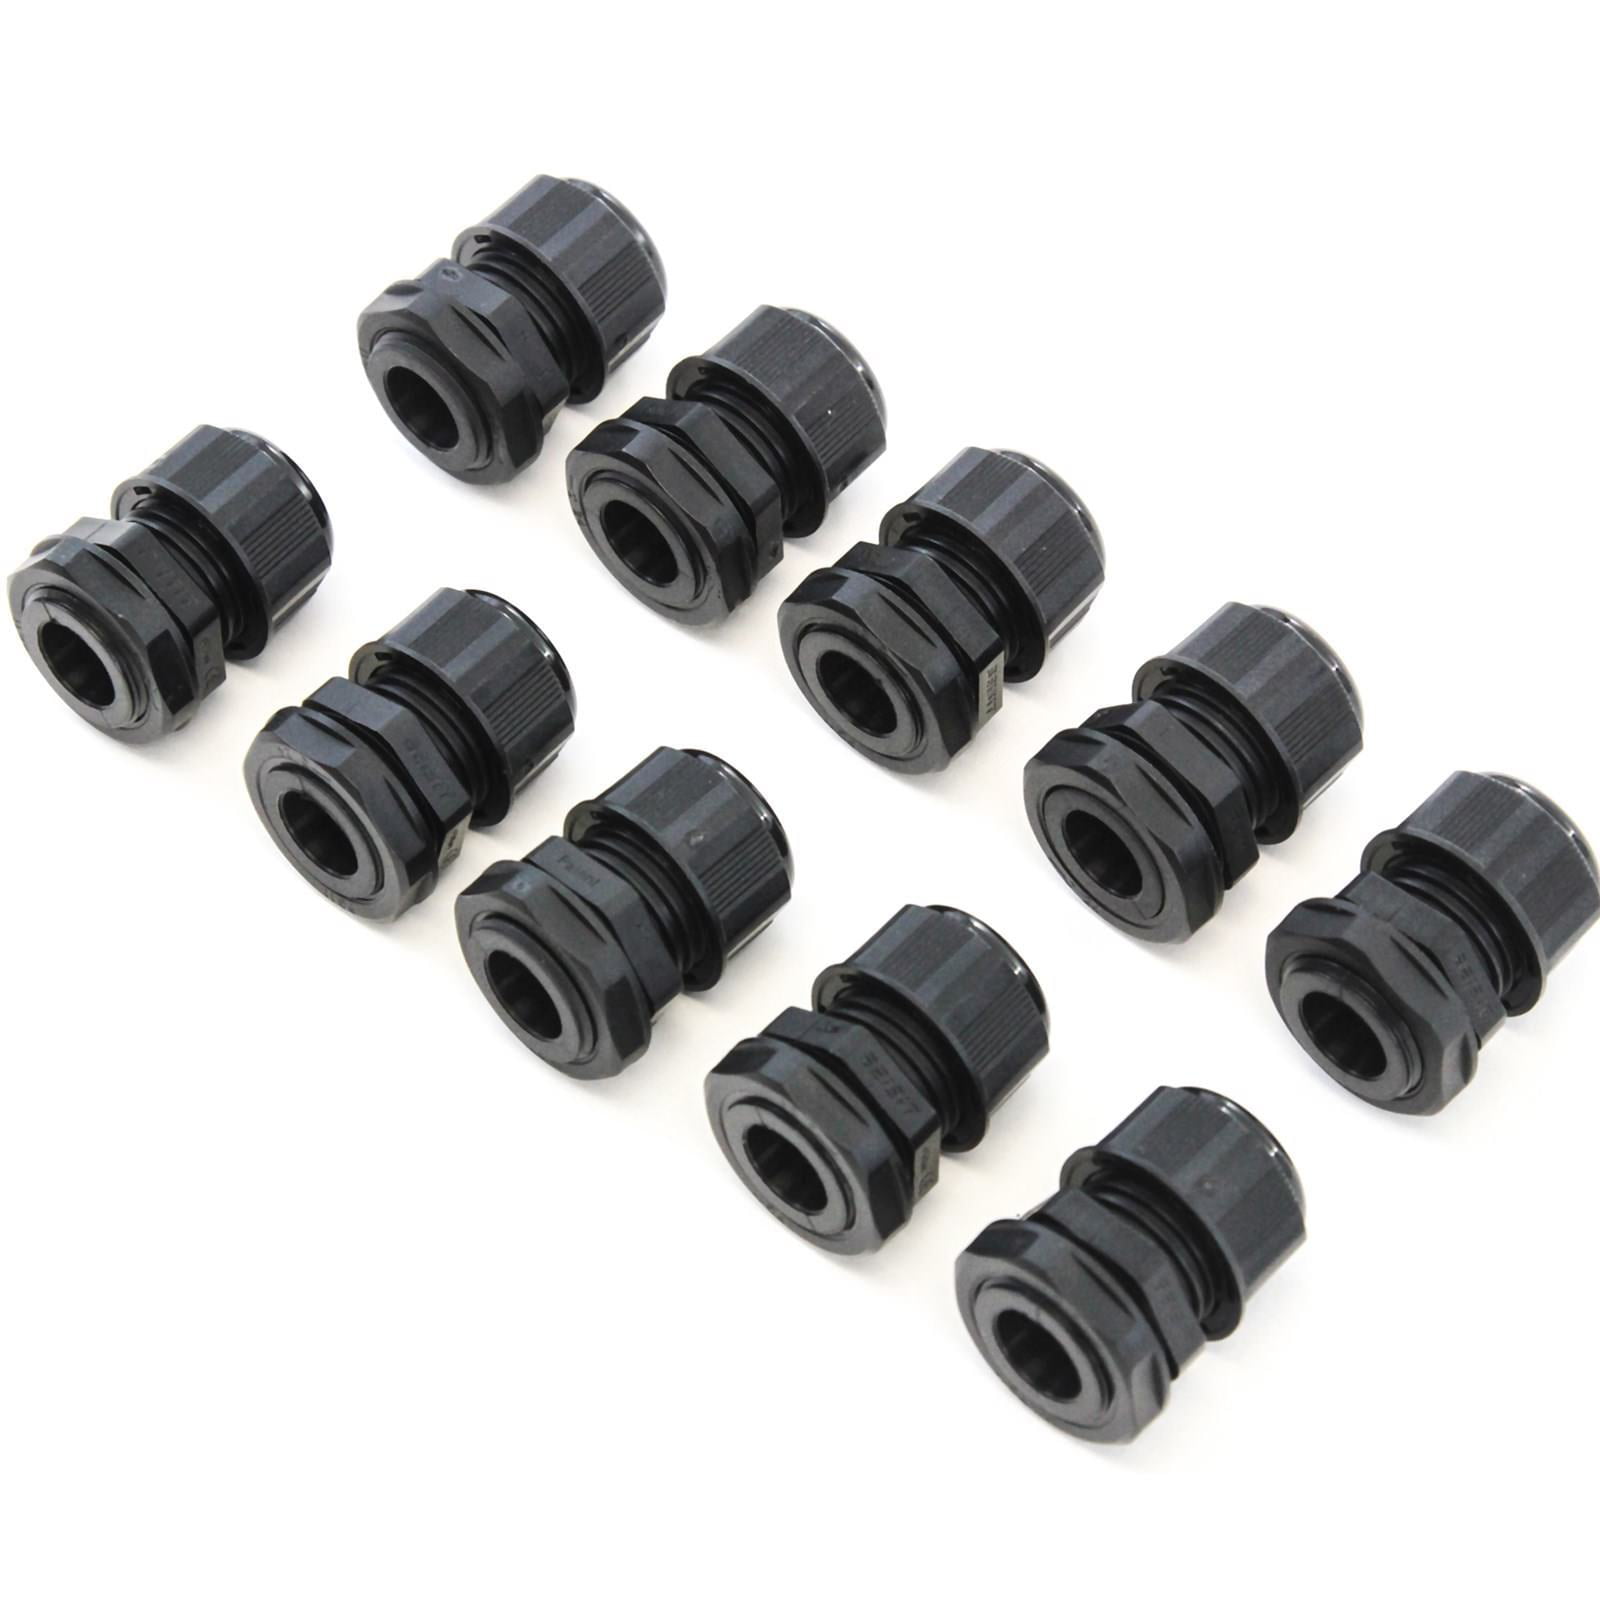 Plastic Nylon Waterproof Wire Connector Fitting 10-14mm 5Pack PG16 Cable Gland